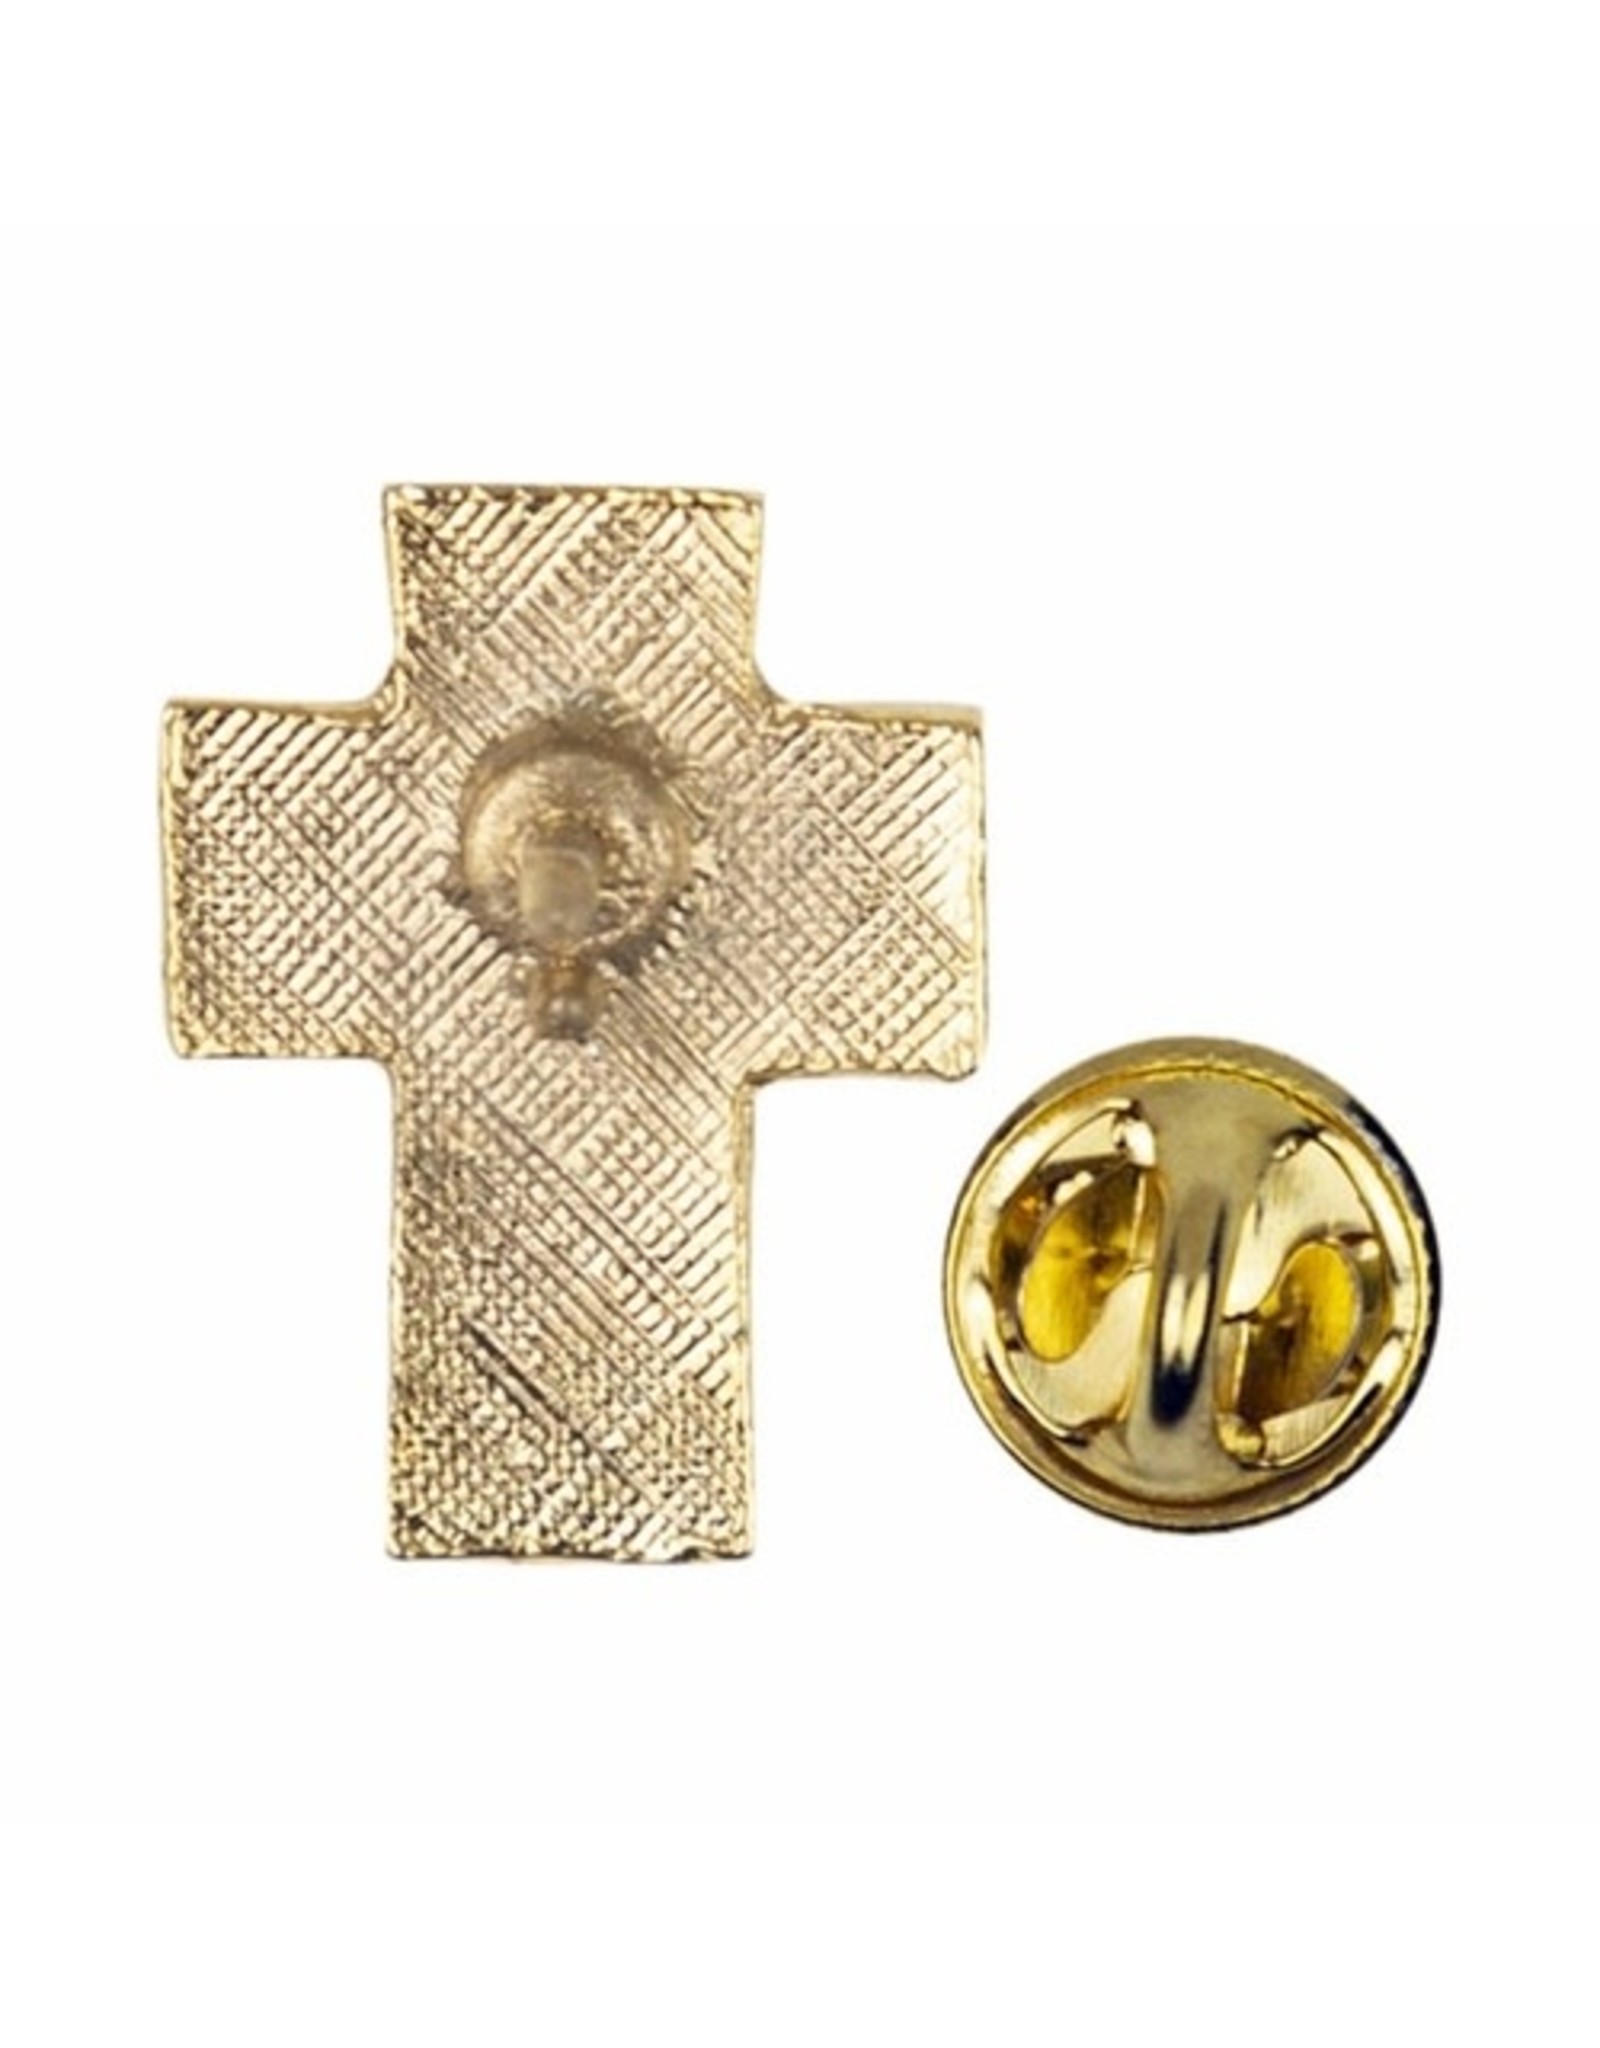 Singer Lapel Pin - Cross with Mustard Seed, Gold Enameled